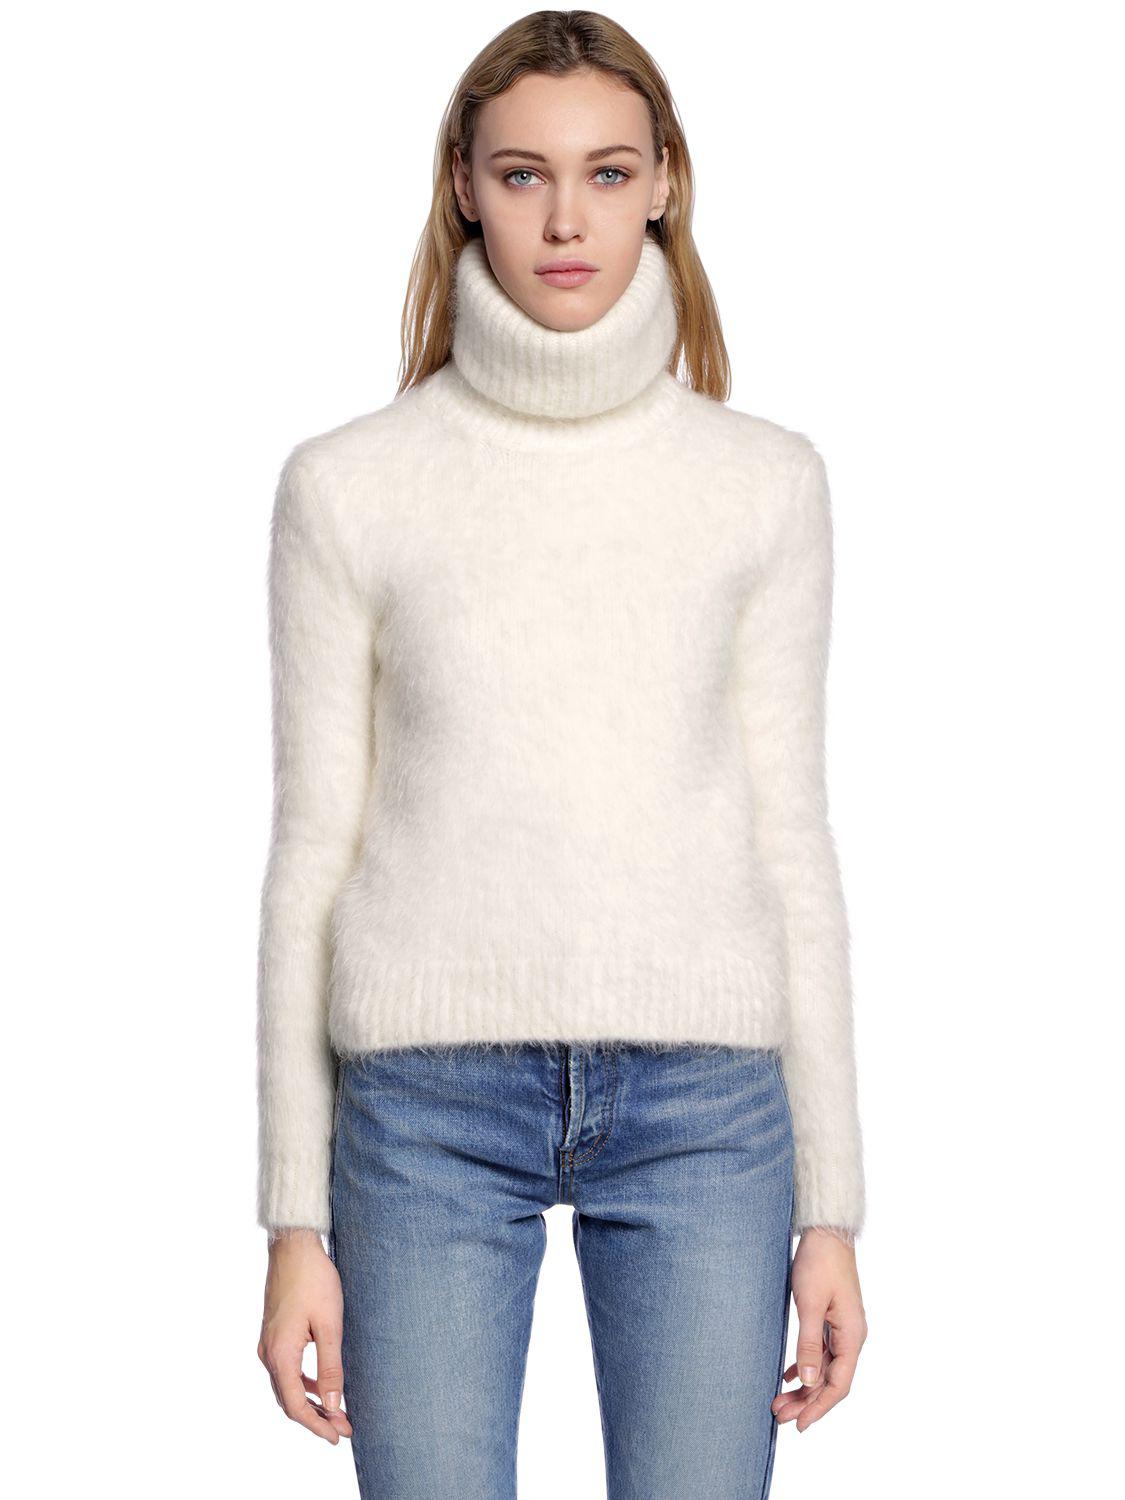 Womens Clothing Jumpers and knitwear Turtlenecks Saint Laurent Wool Cropped Mohair-blend Turtleneck Sweater 